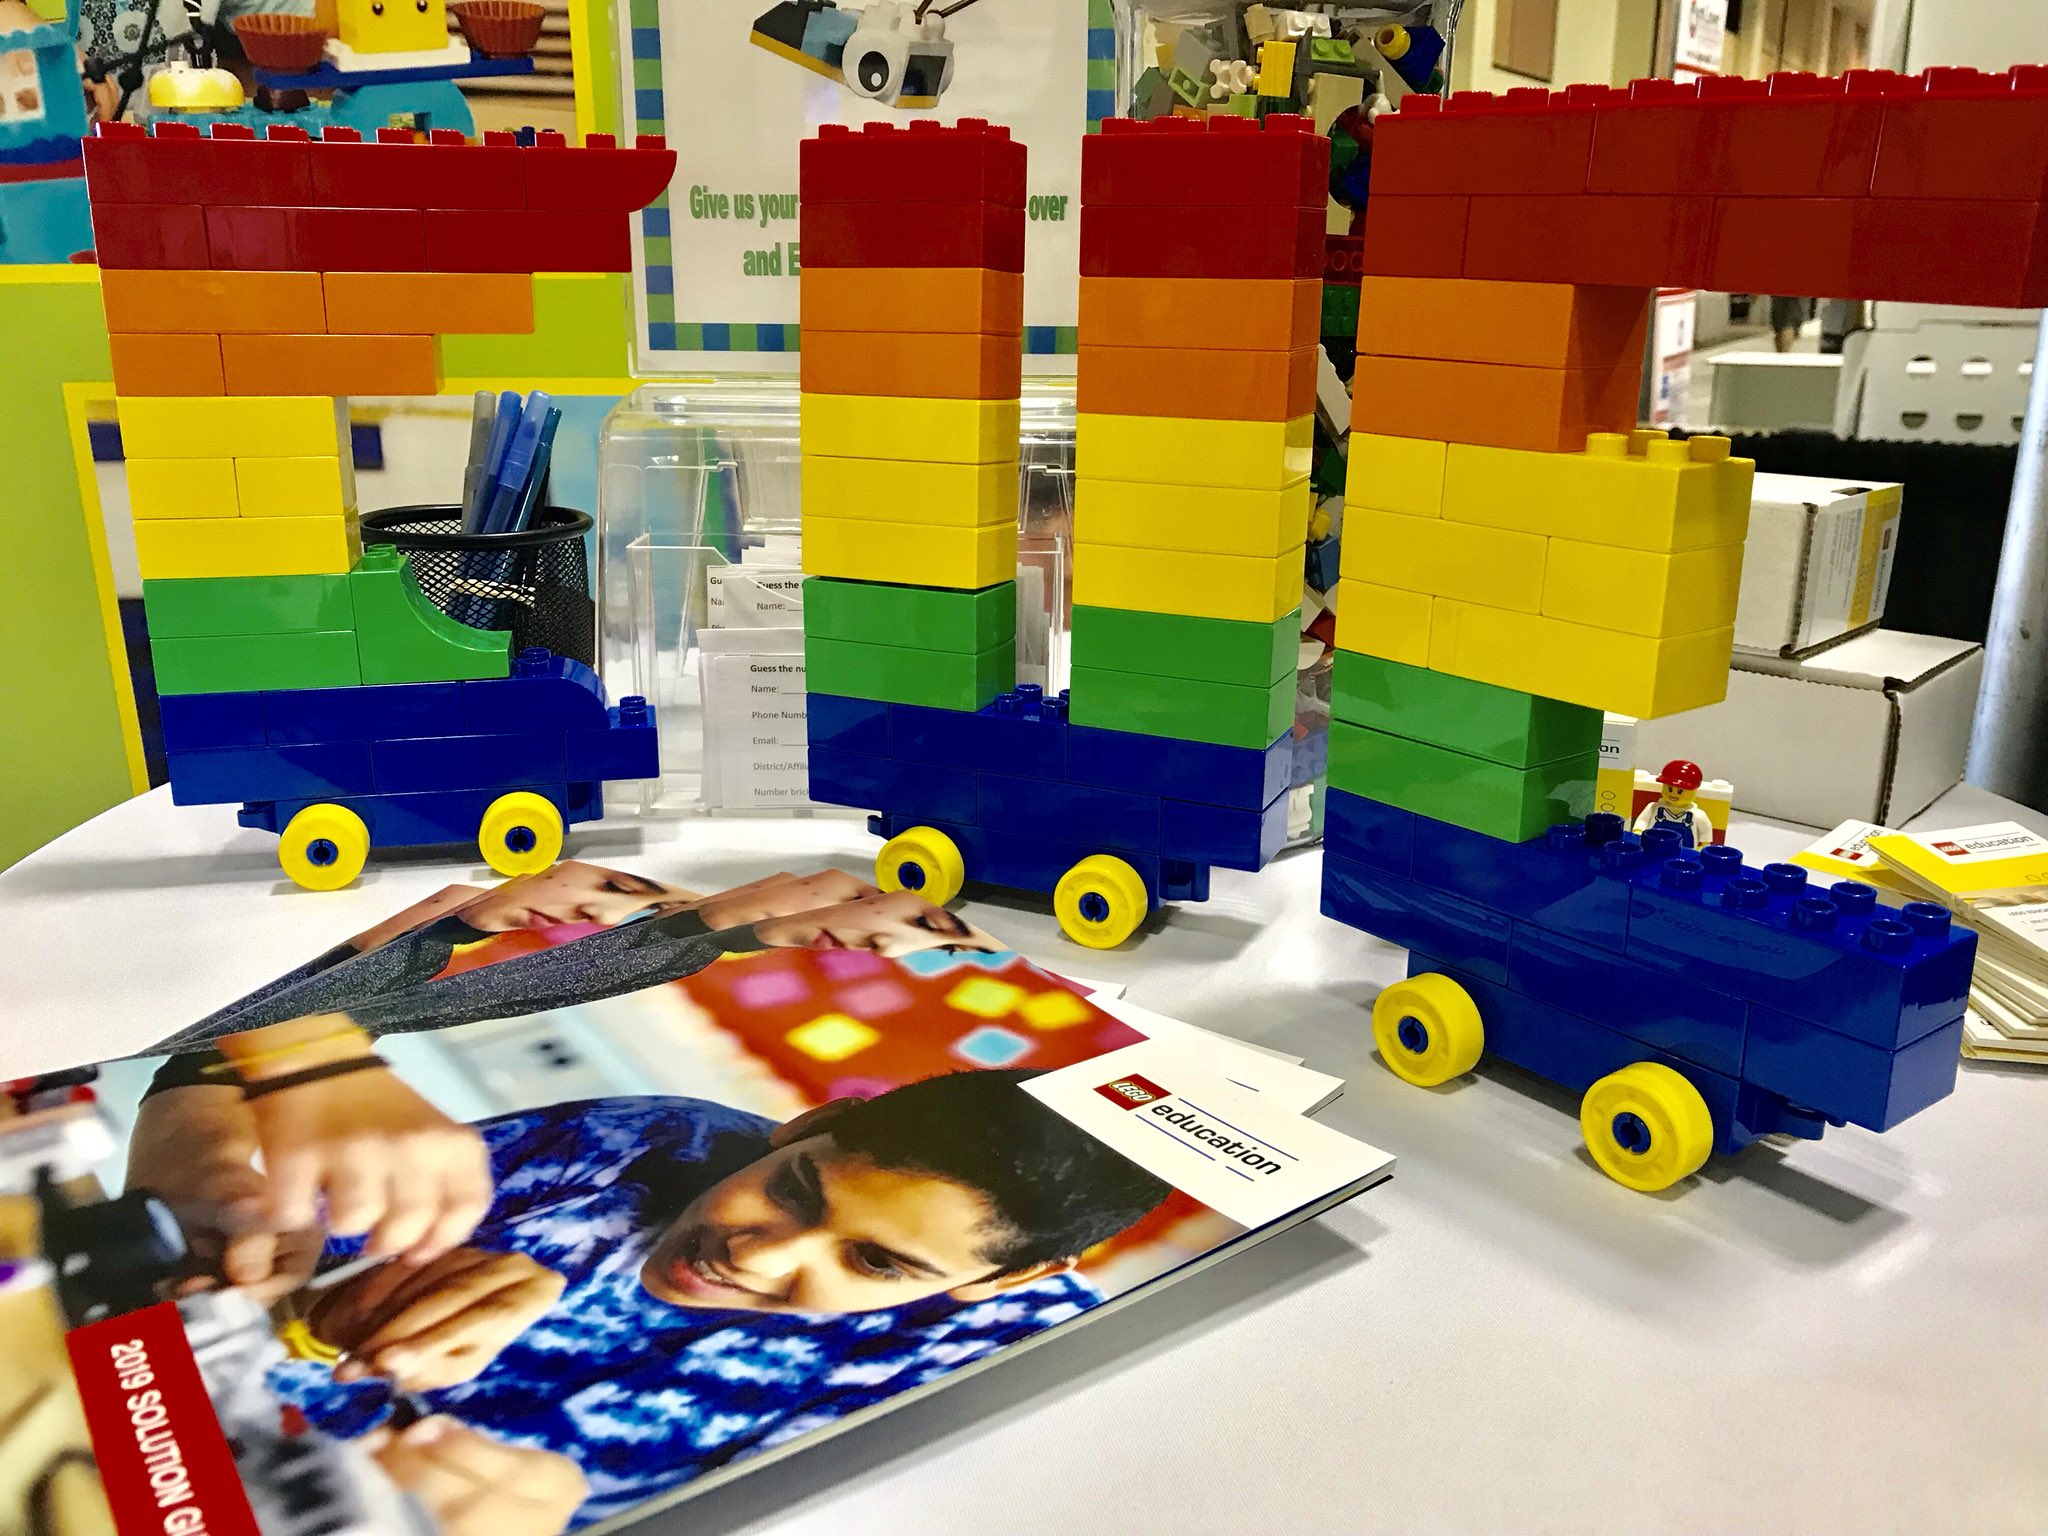 Figuur pijnlijk roterend LEGO Education on Twitter: "You're invited to booth 123 at #CUE19 for a  hands-on #LEGOlearning experience. We can't wait to meet you!  https://t.co/6dr6Rjwu53" / Twitter